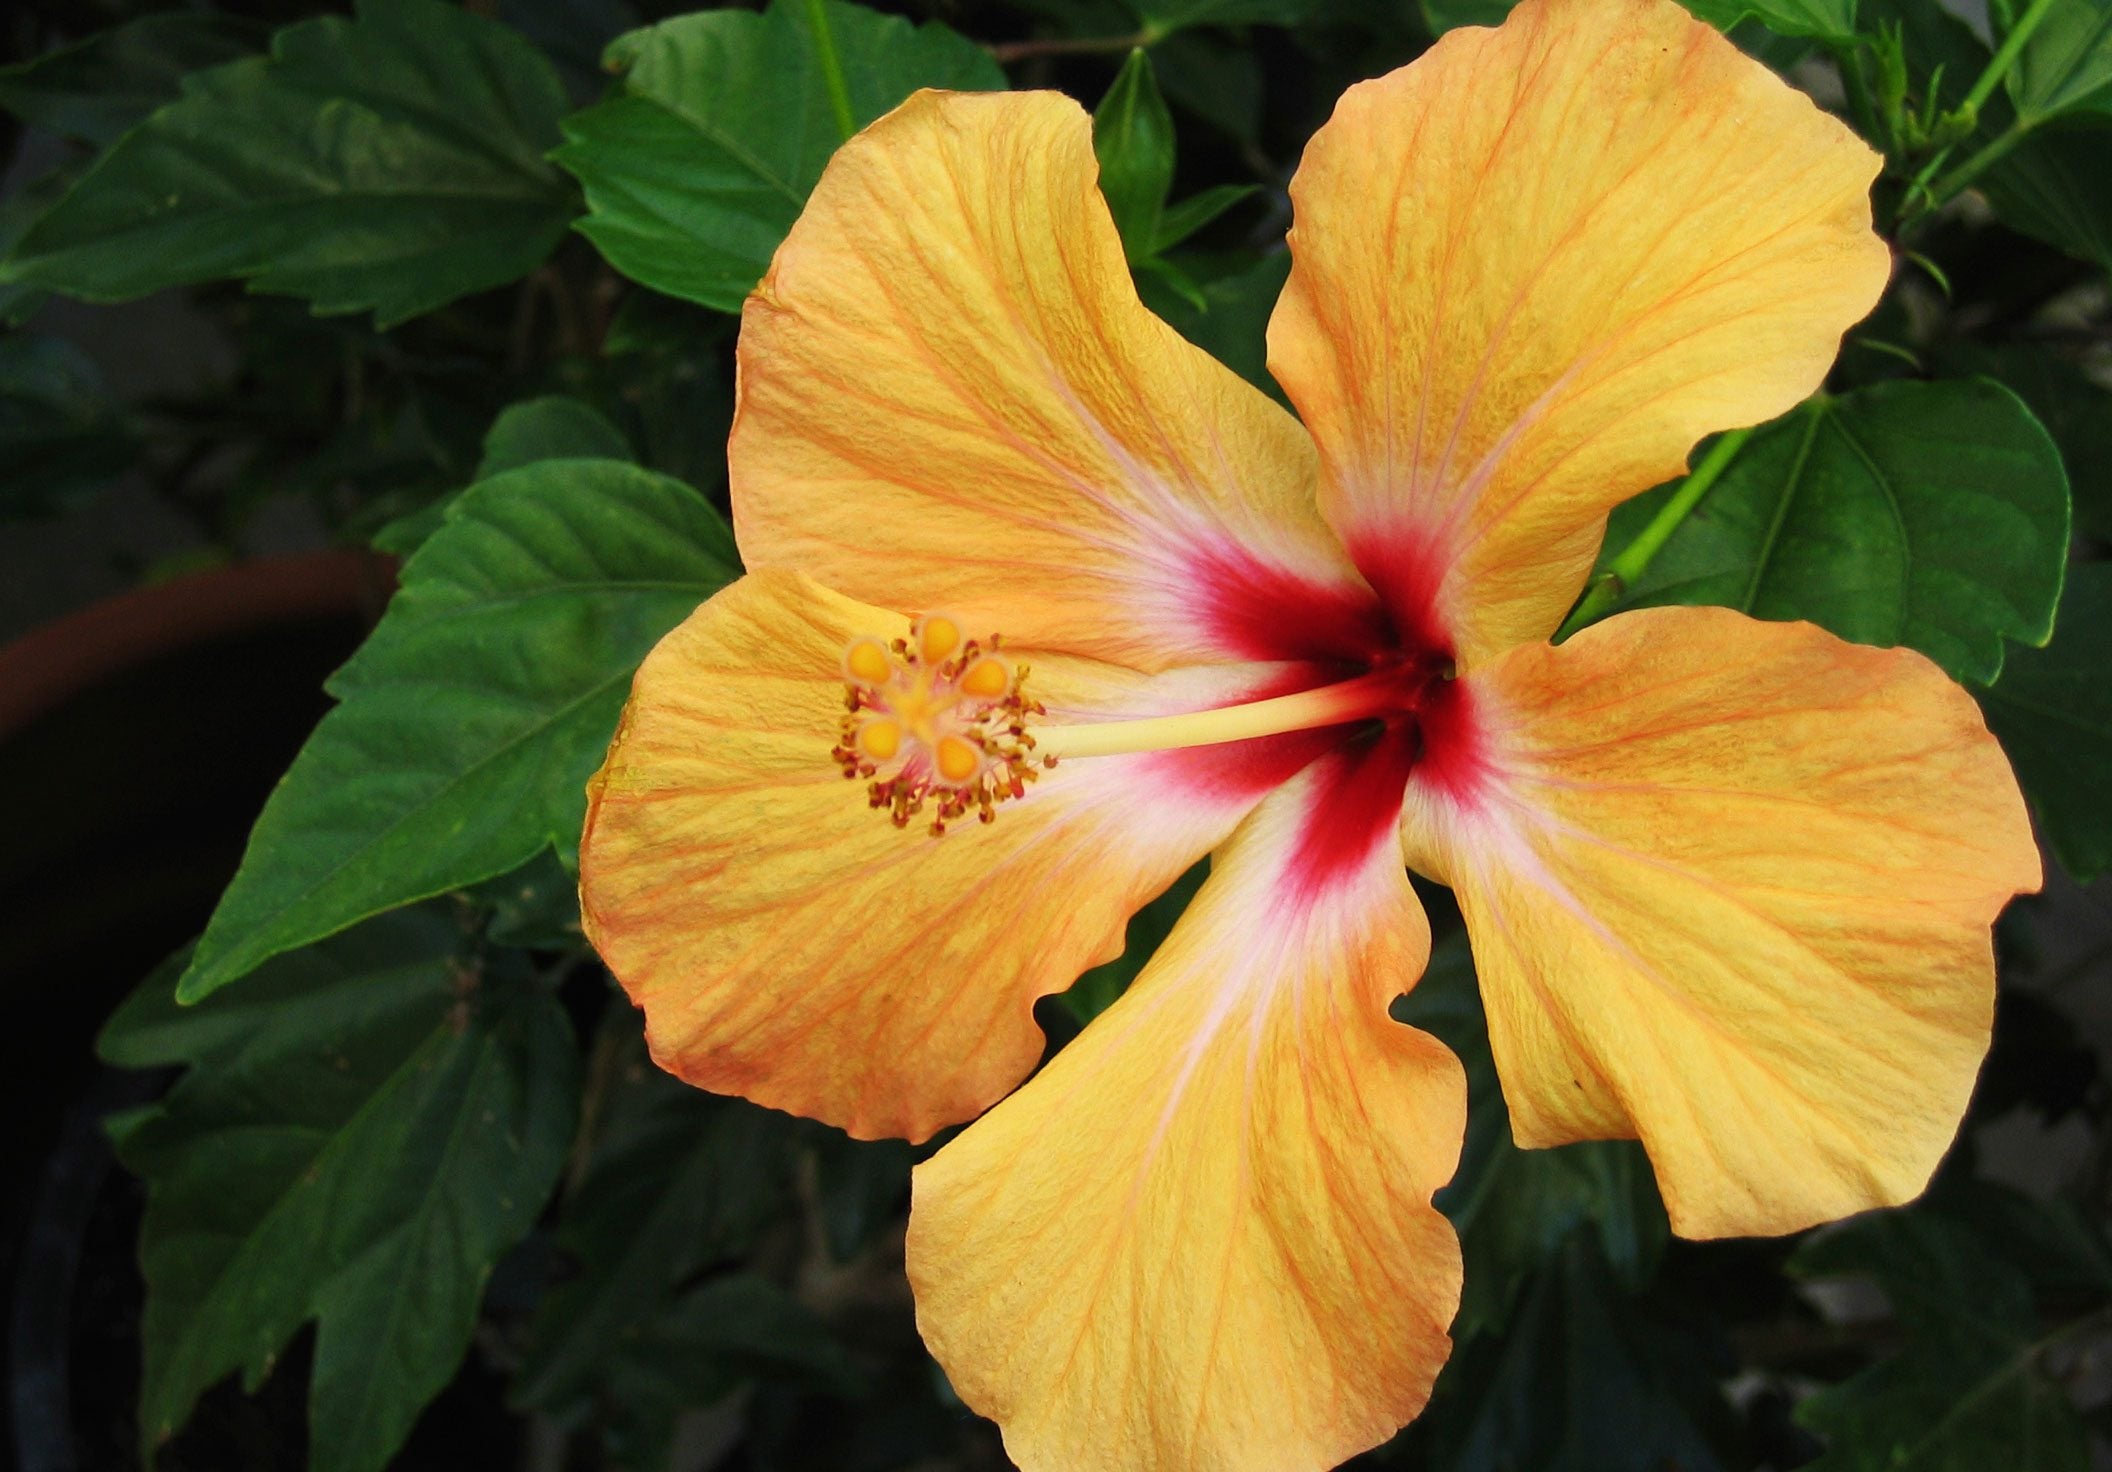 What Colors Are Hibiscus Flowers When They Bloom?